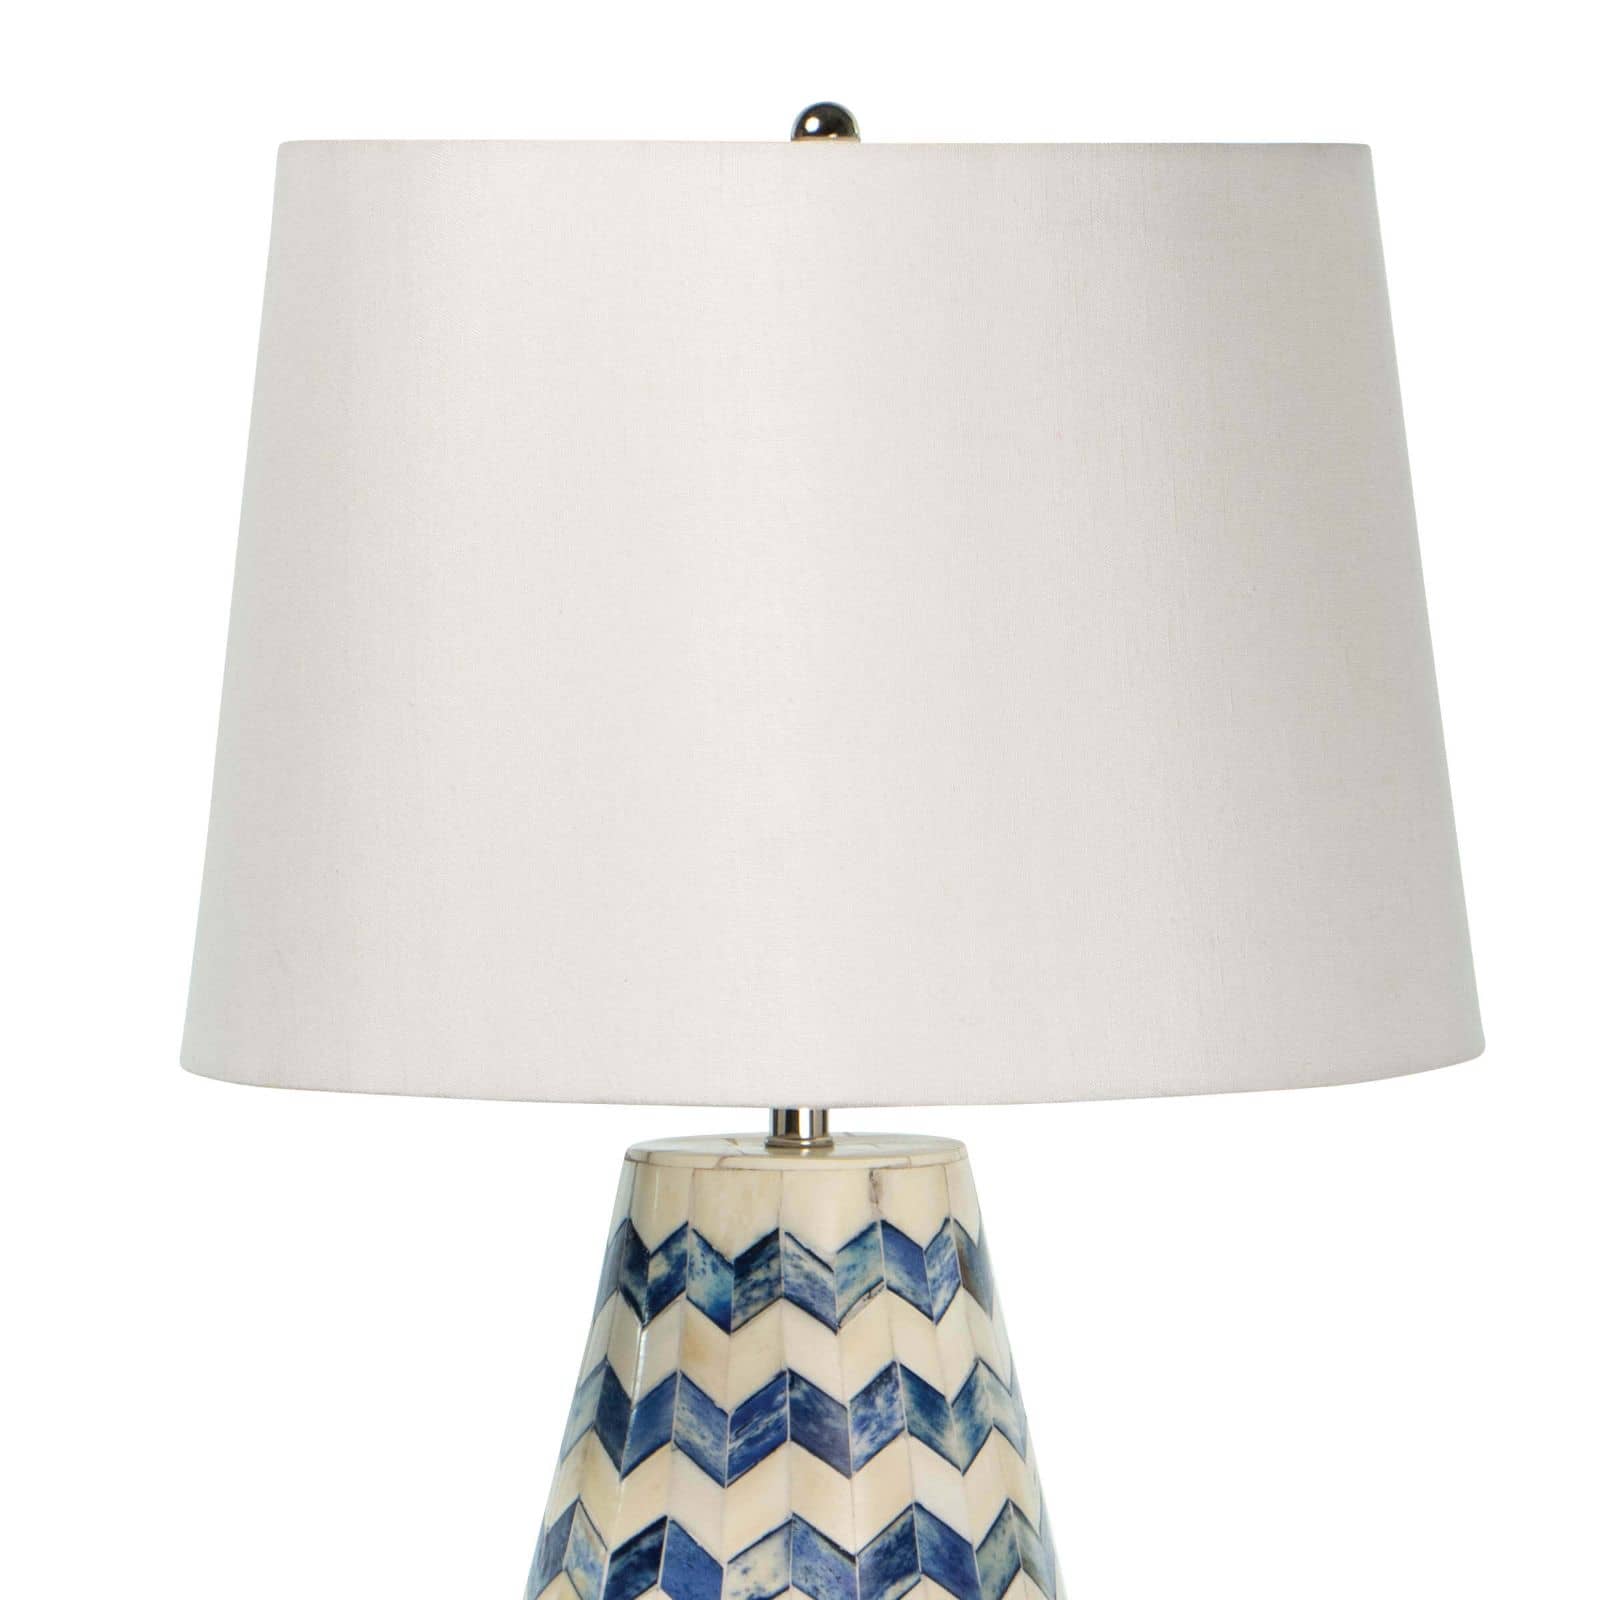 Cassia Chevron Table Lamp in Blue by Coastal Living